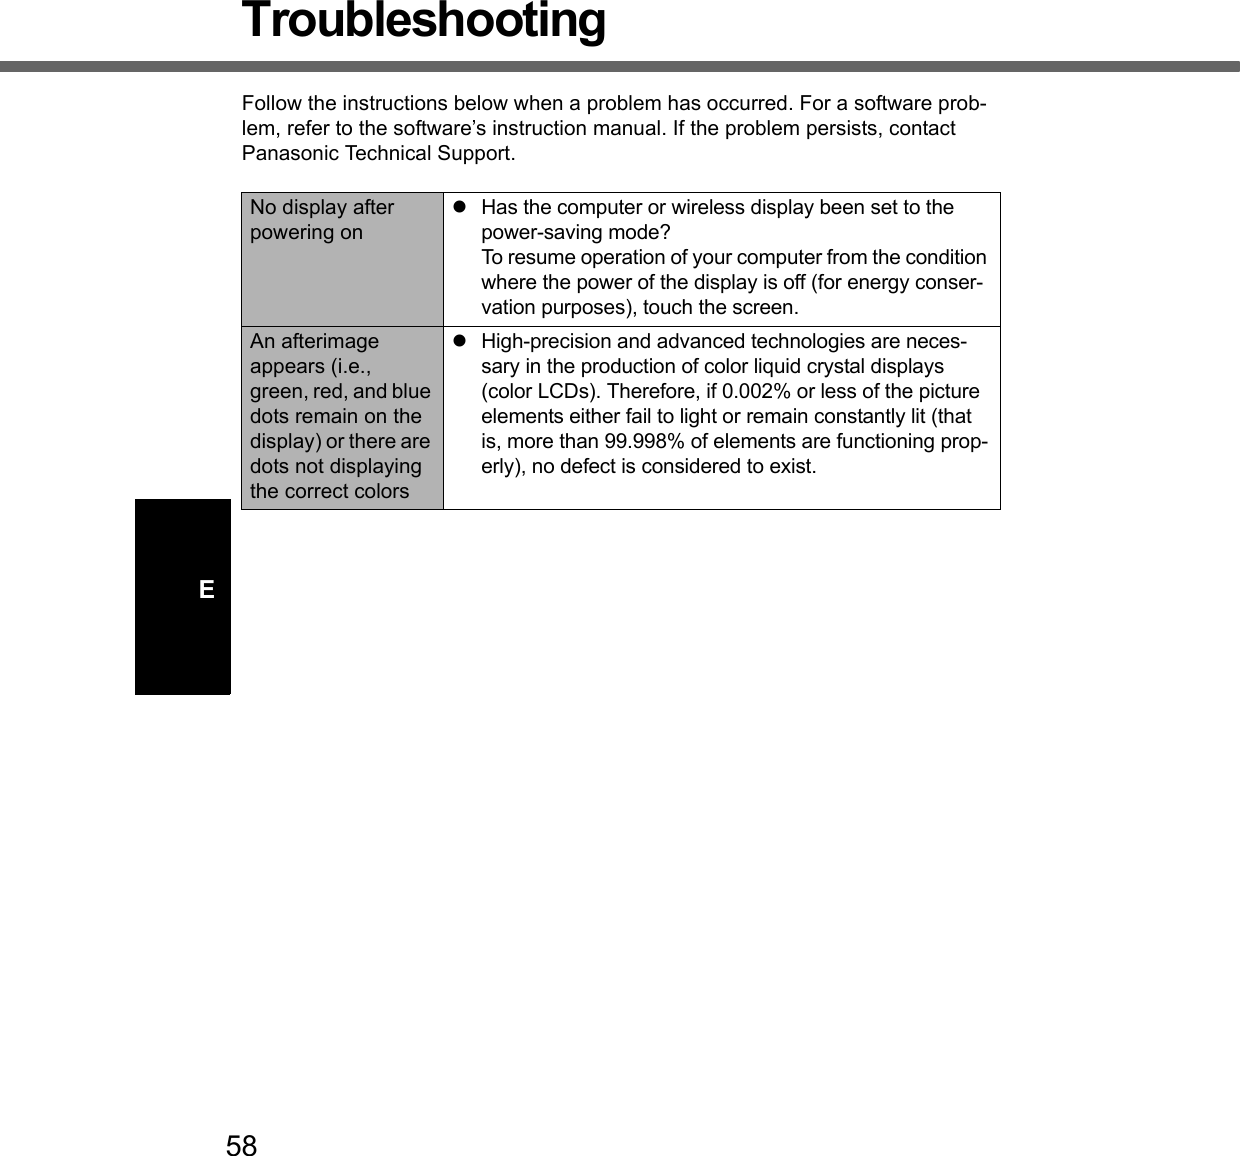 58ETroubleshootingFollow the instructions below when a problem has occurred. For a software prob-lem, refer to the software’s instruction manual. If the problem persists, contact  Panasonic Technical Support.No display after powering onzHas the computer or wireless display been set to the power-saving mode? To resume operation of your computer from the condition where the power of the display is off (for energy conser-vation purposes), touch the screen.An afterimage appears (i.e., green, red, and blue dots remain on the display) or there are dots not displaying the correct colorszHigh-precision and advanced technologies are neces-sary in the production of color liquid crystal displays (color LCDs). Therefore, if 0.002% or less of the picture elements either fail to light or remain constantly lit (that is, more than 99.998% of elements are functioning prop-erly), no defect is considered to exist.